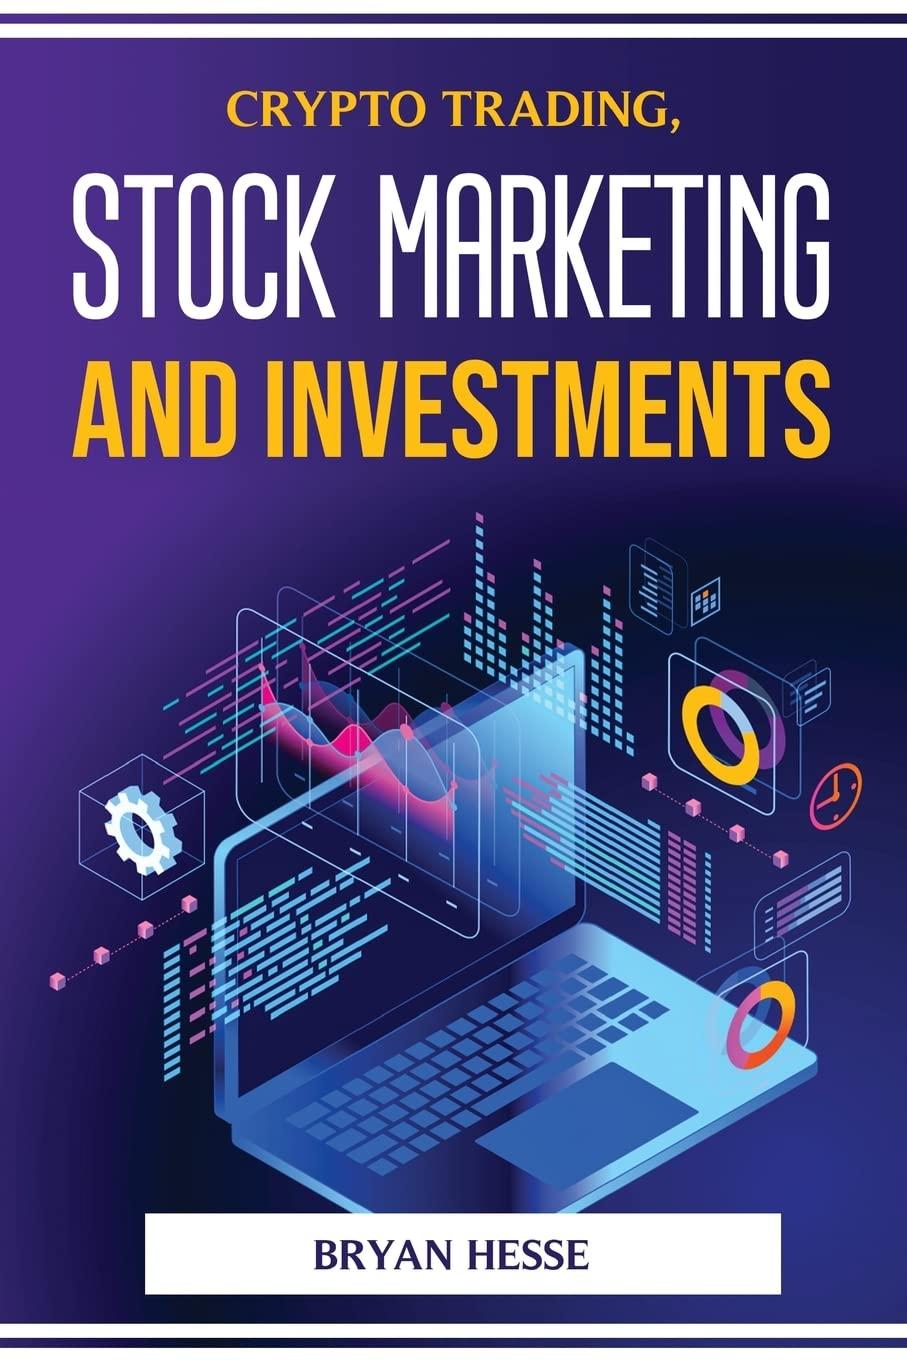 crypto trading stock marketing and investments 1st edition bryan hesse 1804773999, 978-1804773994